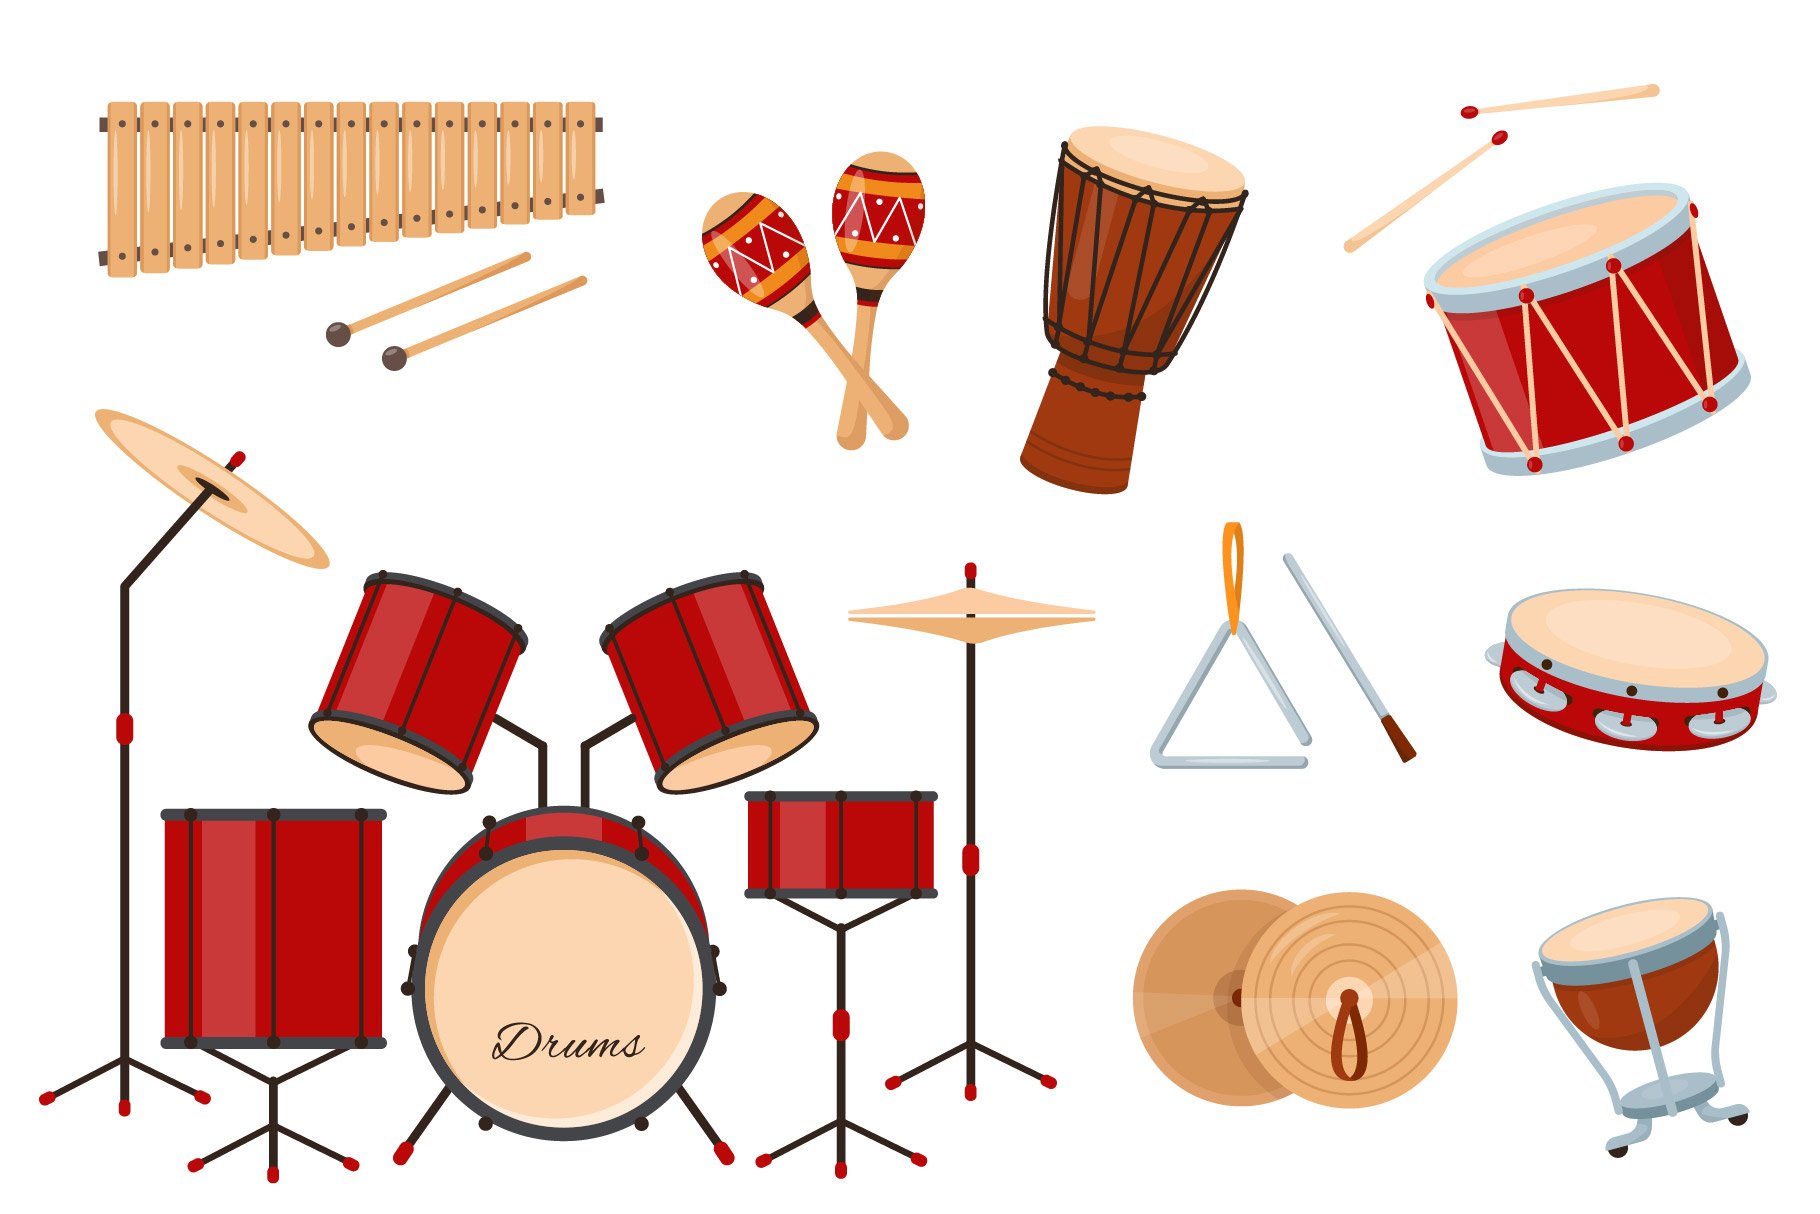 Diverse of drums instruments.